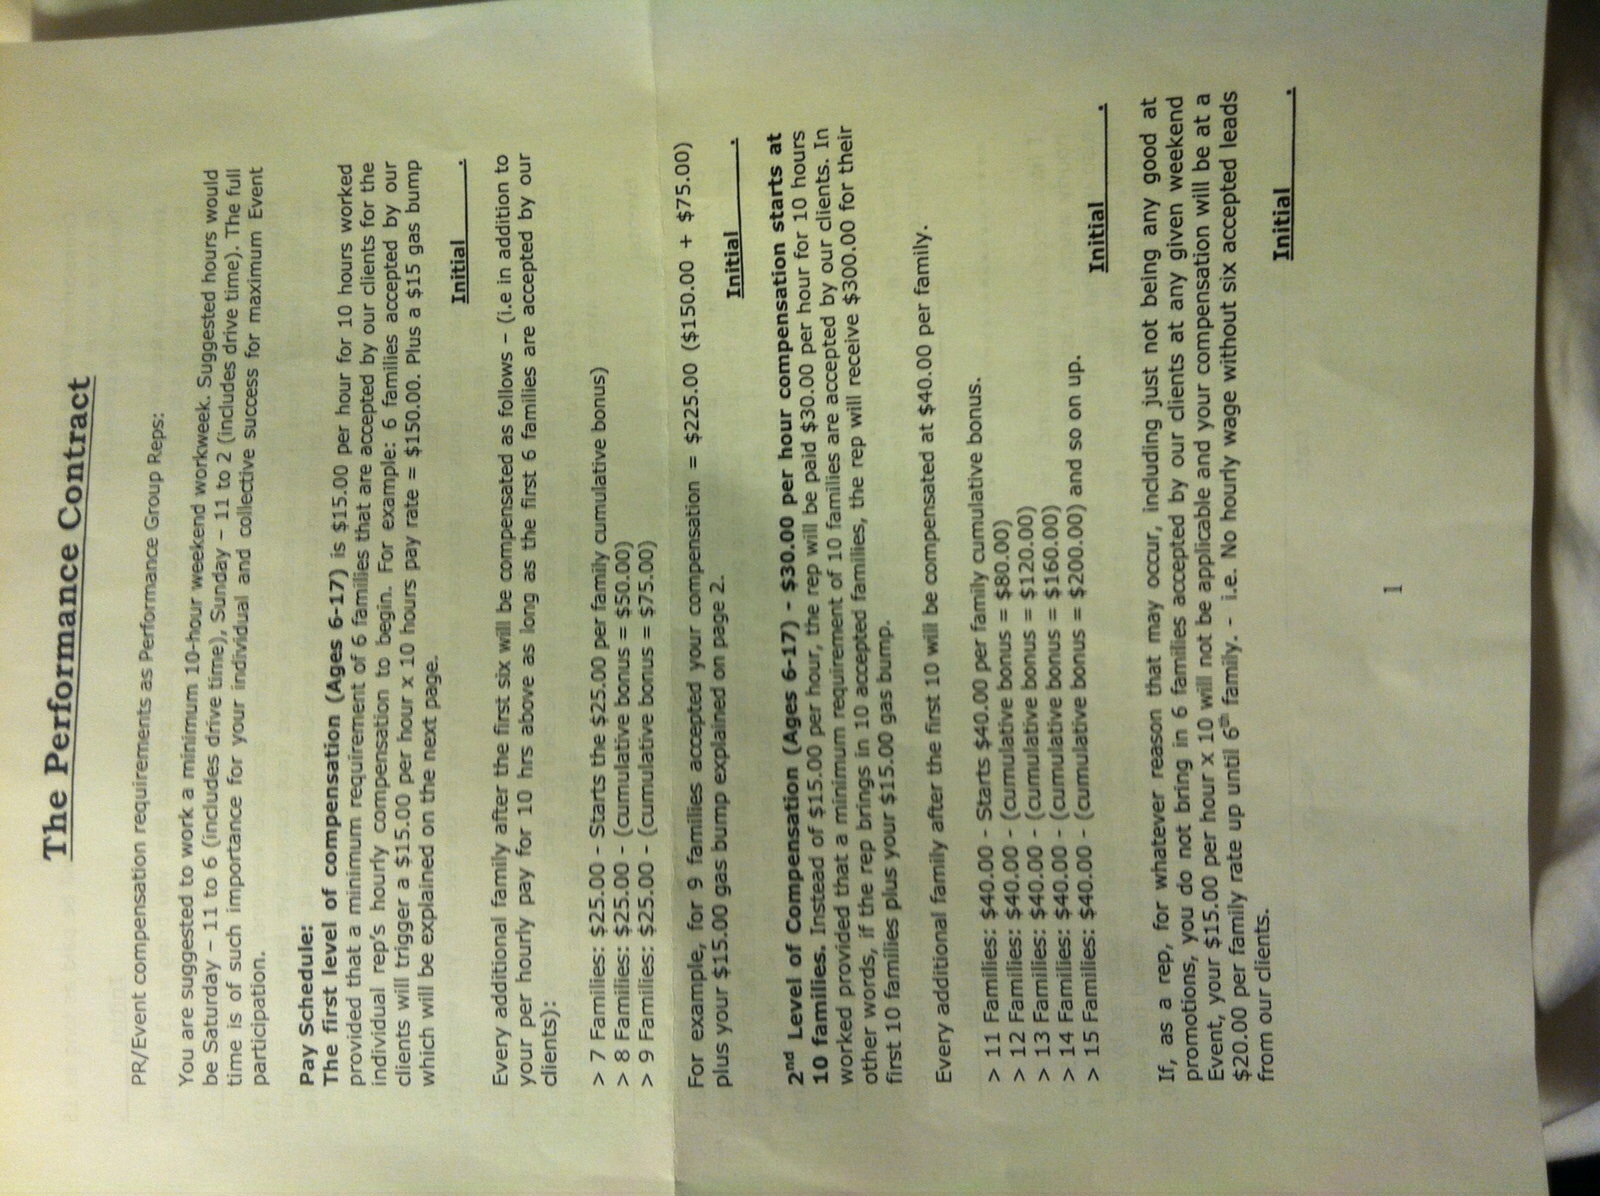 This is our contract, after we were lied to and offered 30.00 hourly